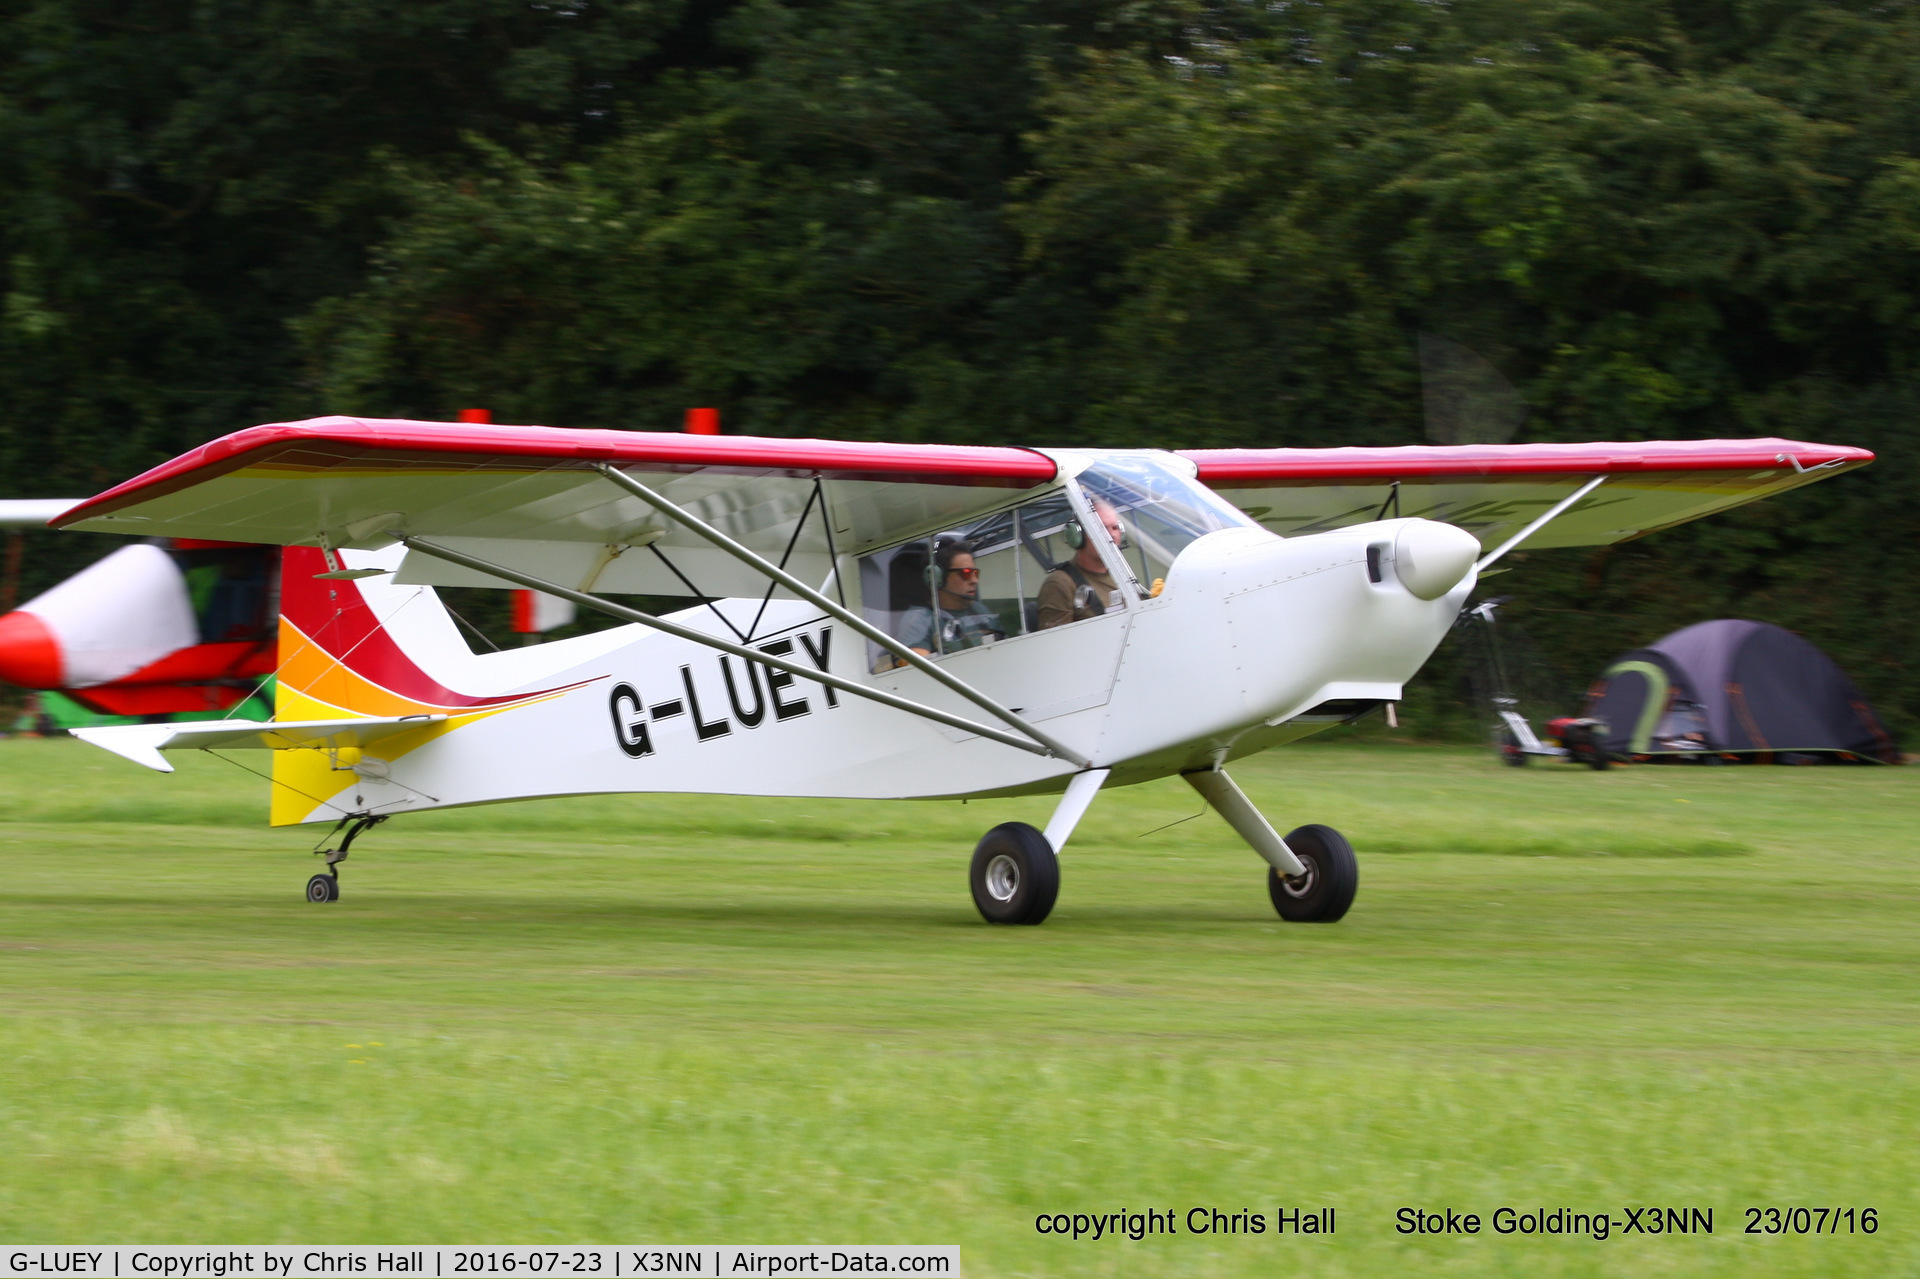 G-LUEY, 2010 Rans S-7S Courier C/N LAA 218-14772, Stoke Golding Stakeout 2016